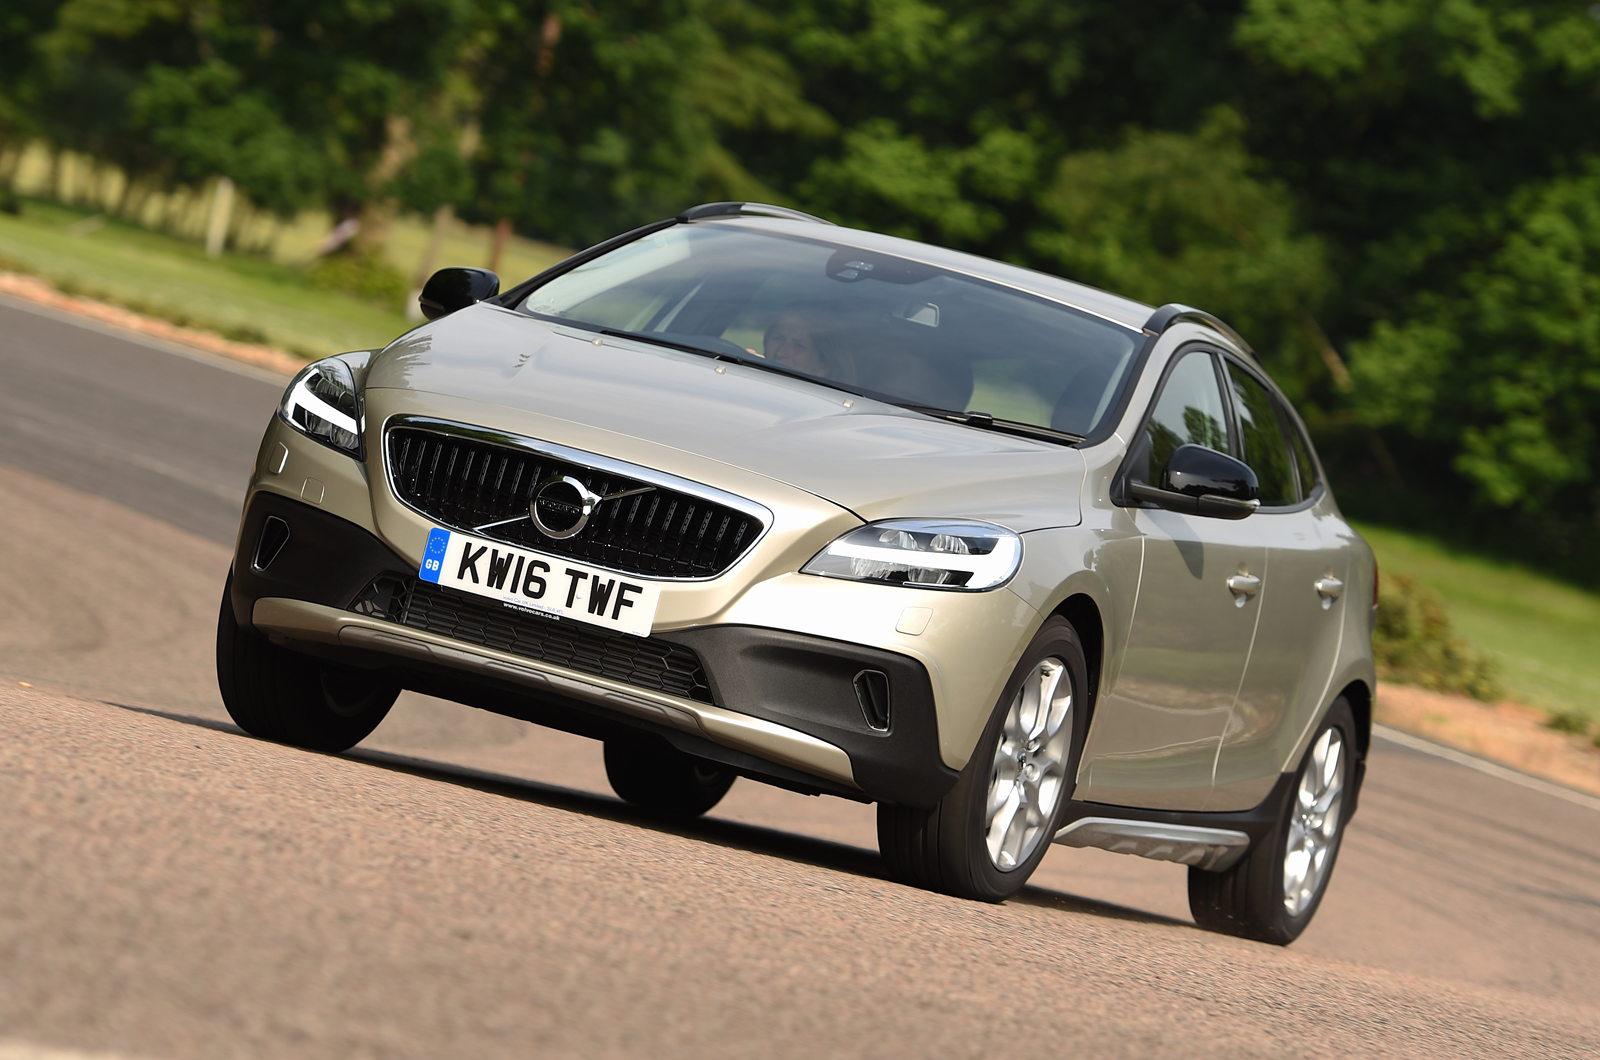 2016 Volvo V40 Cross Country D2 review review | Autocar